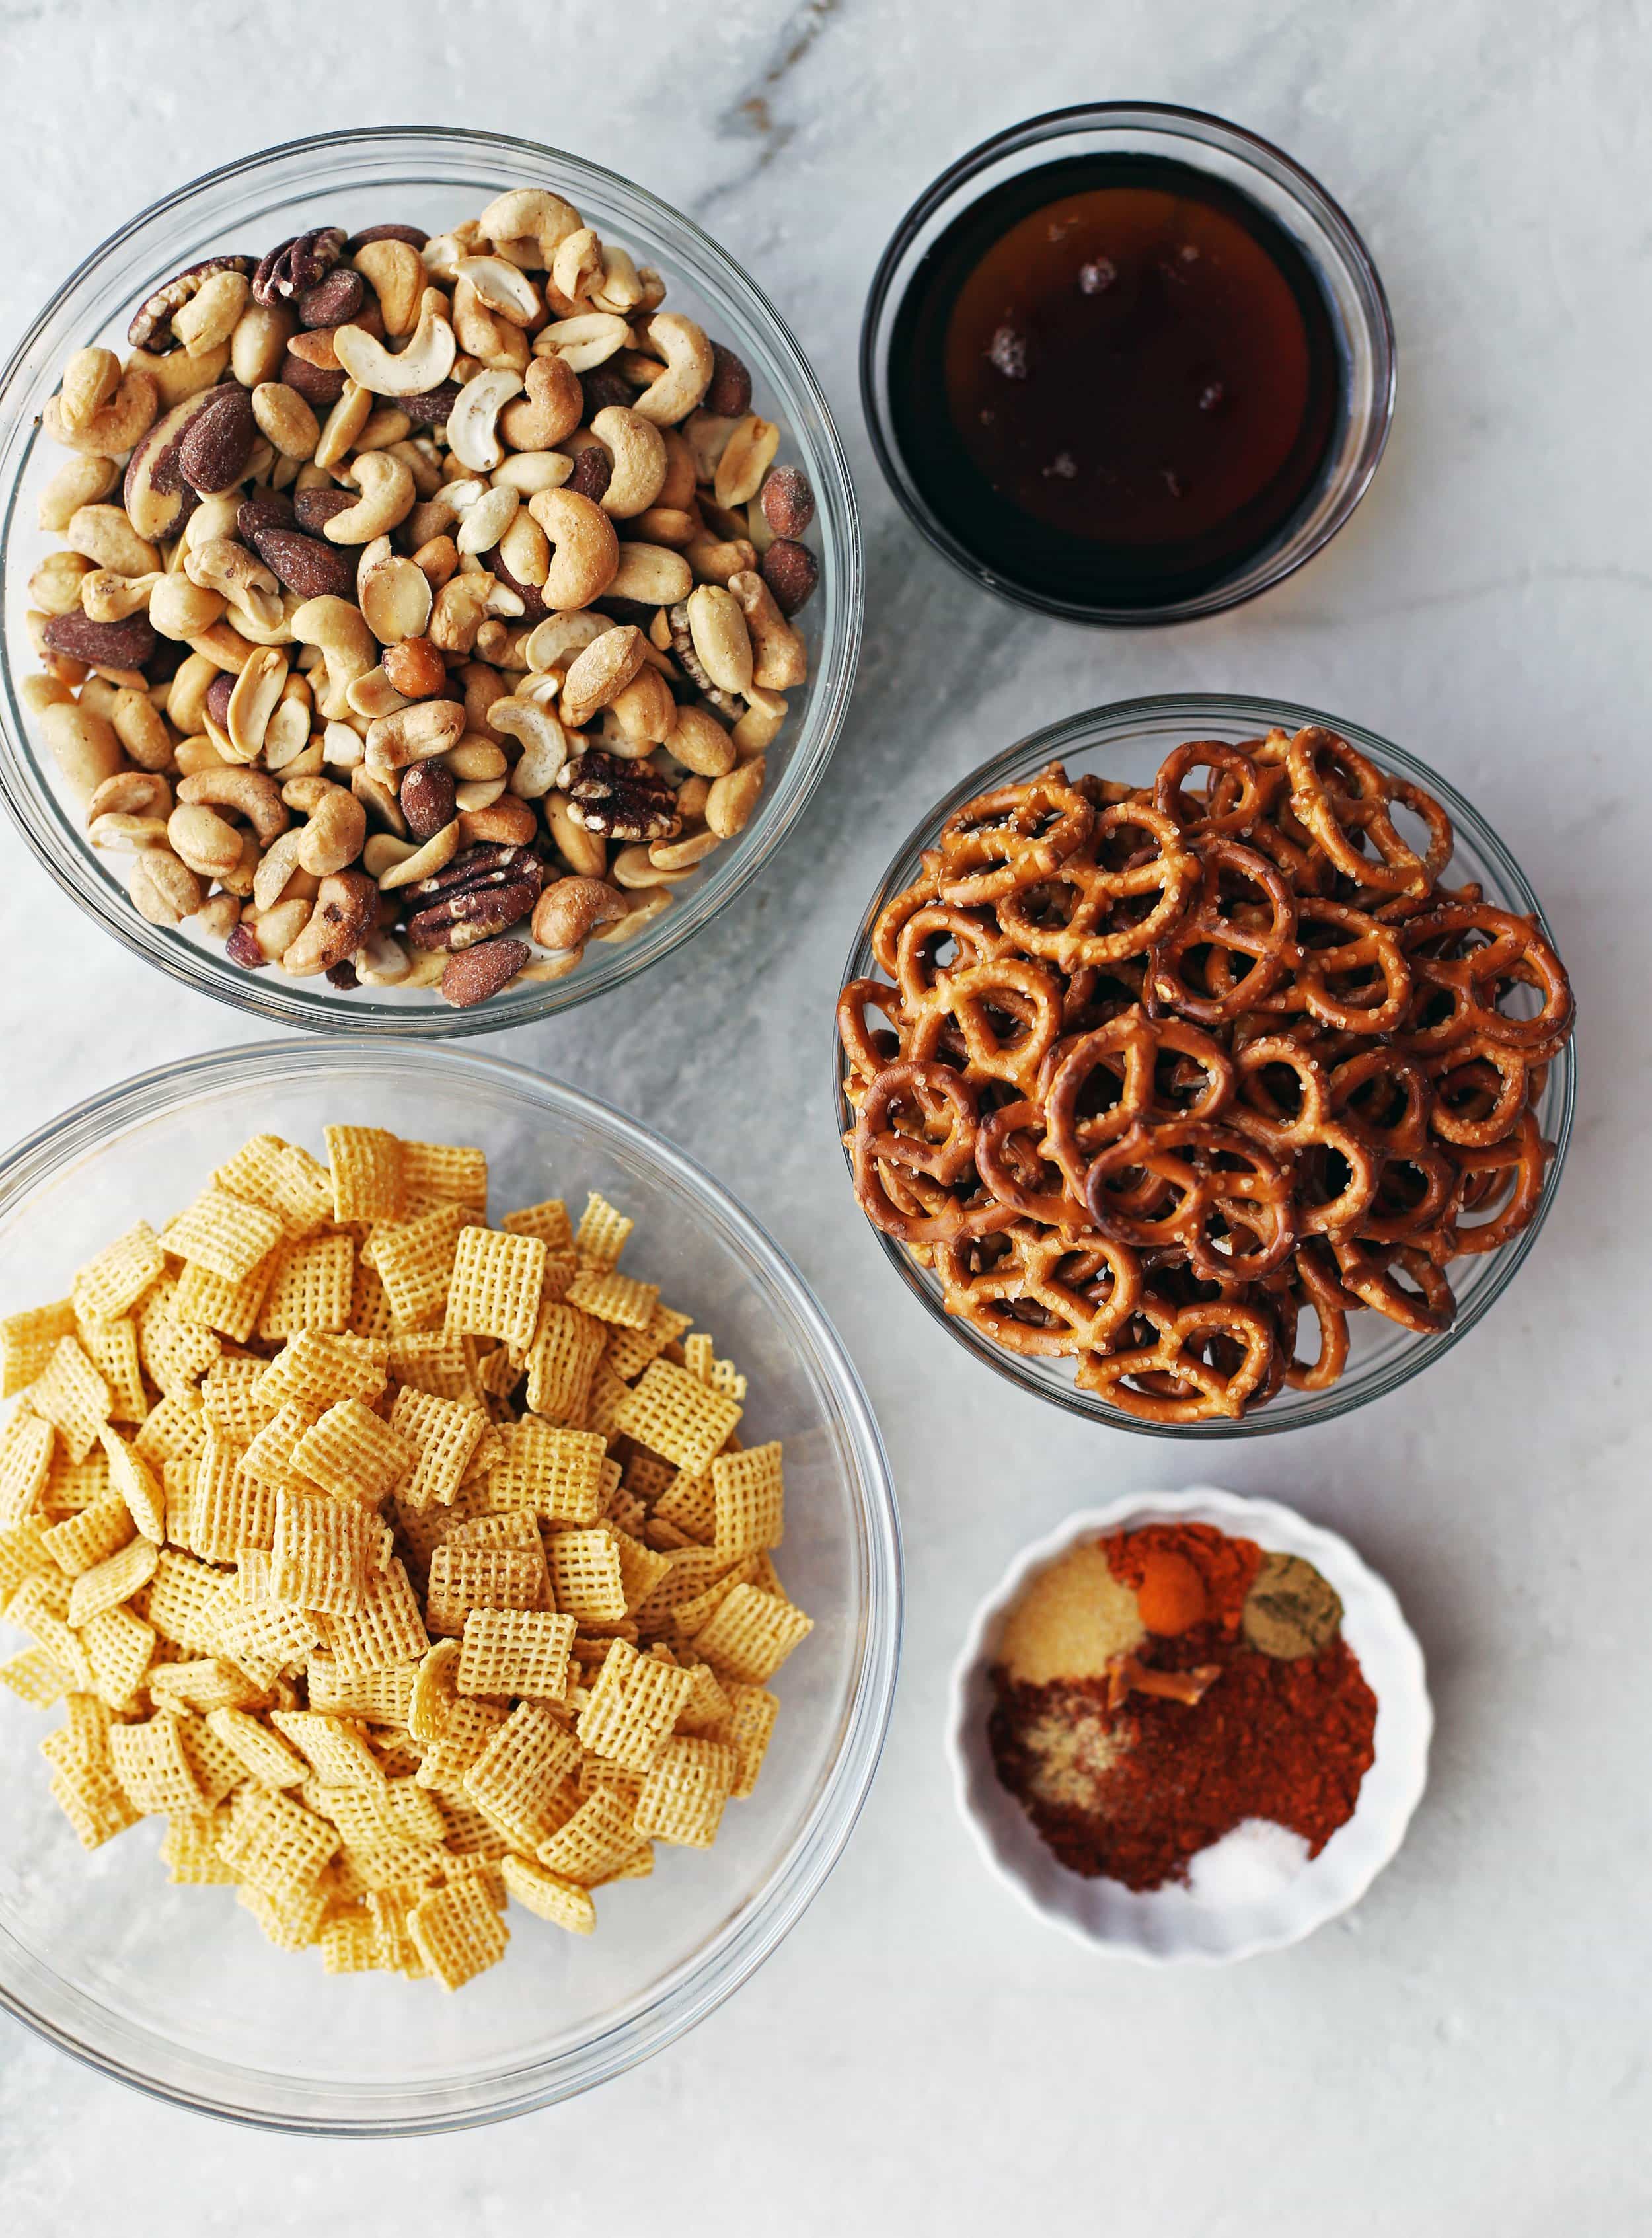 Spicy-Sweet Maple Snack Mix Recipe (With Video)